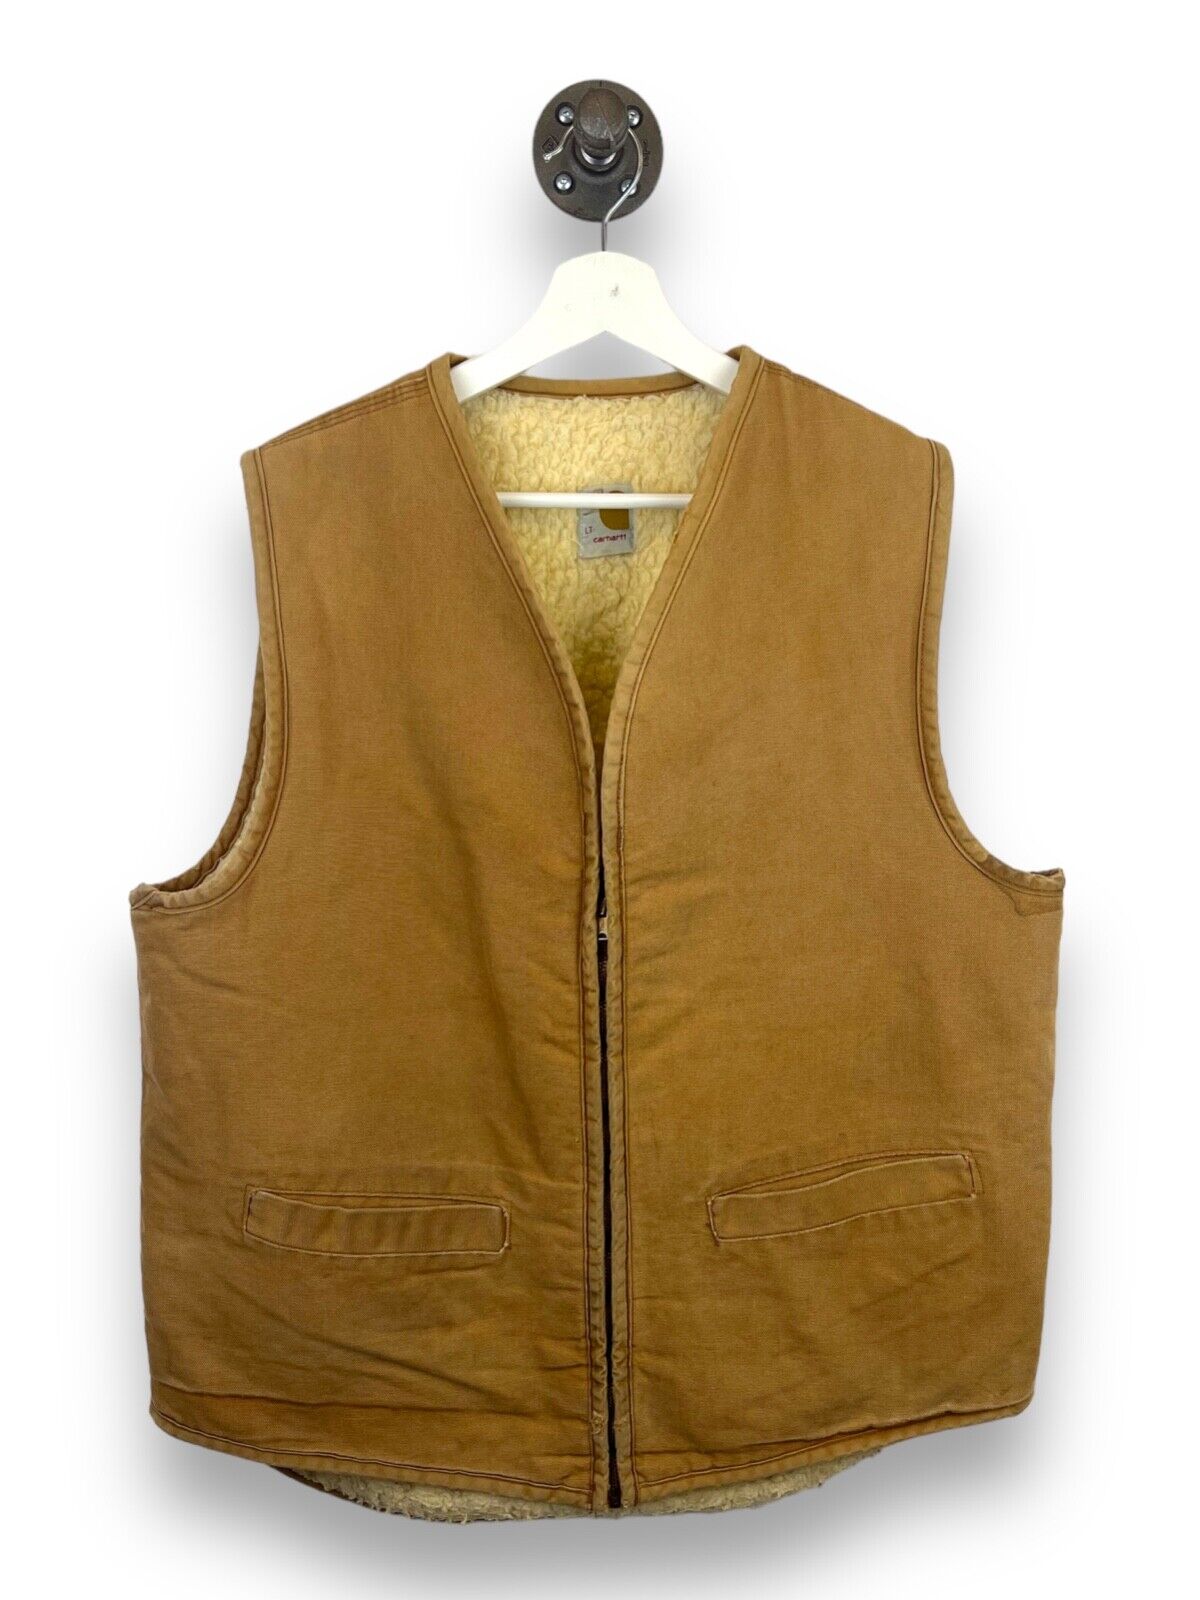 Vintage 70s Carhartt Sherpa Lined Canvas Workwear Vest Jacket Size Long/Tall